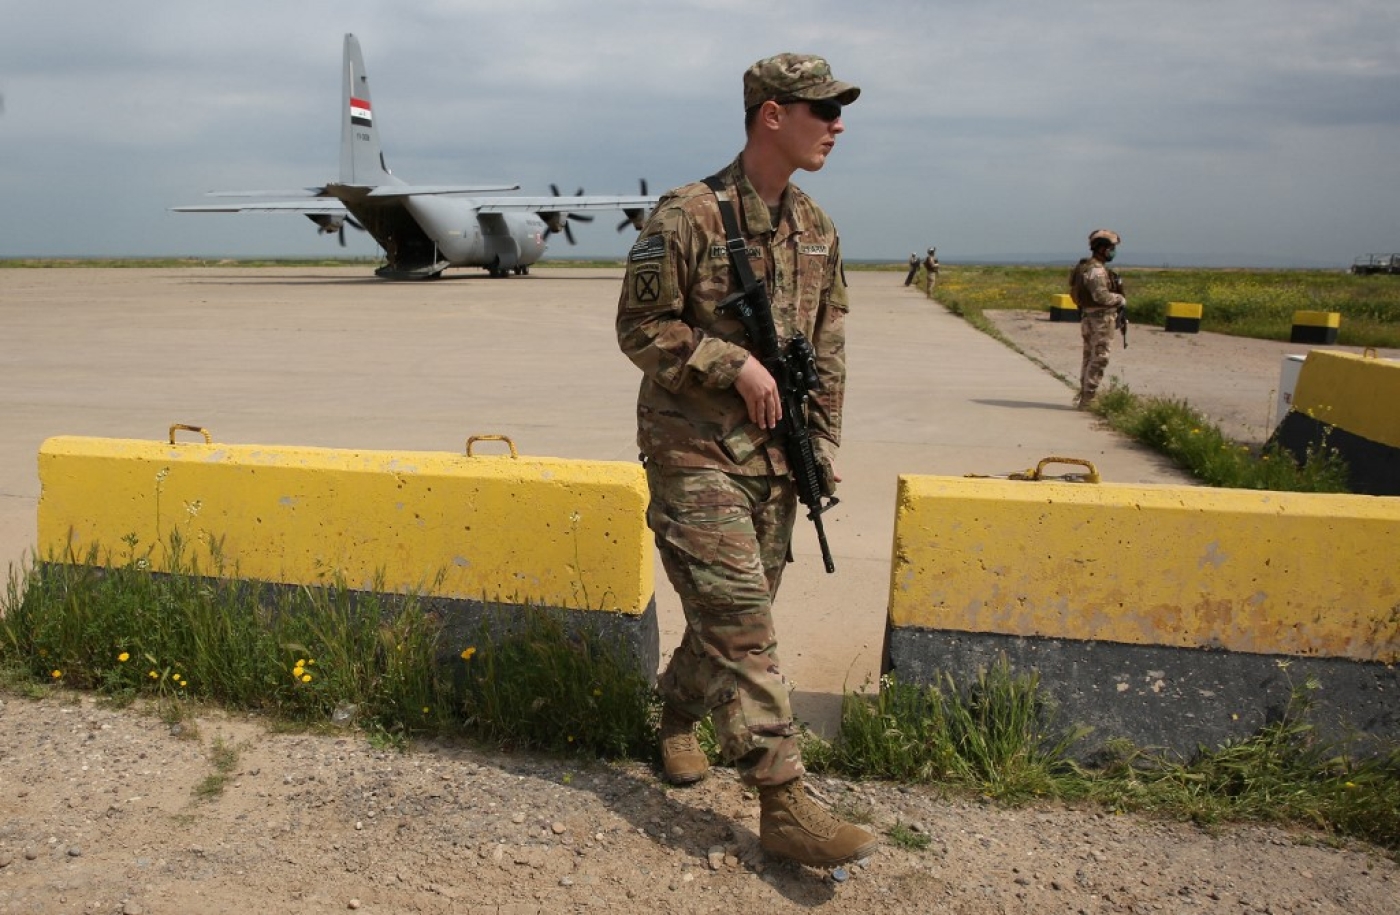 In July, US President Joe Biden announced the country's combat mission in Iraq will conclude by the end of the year.